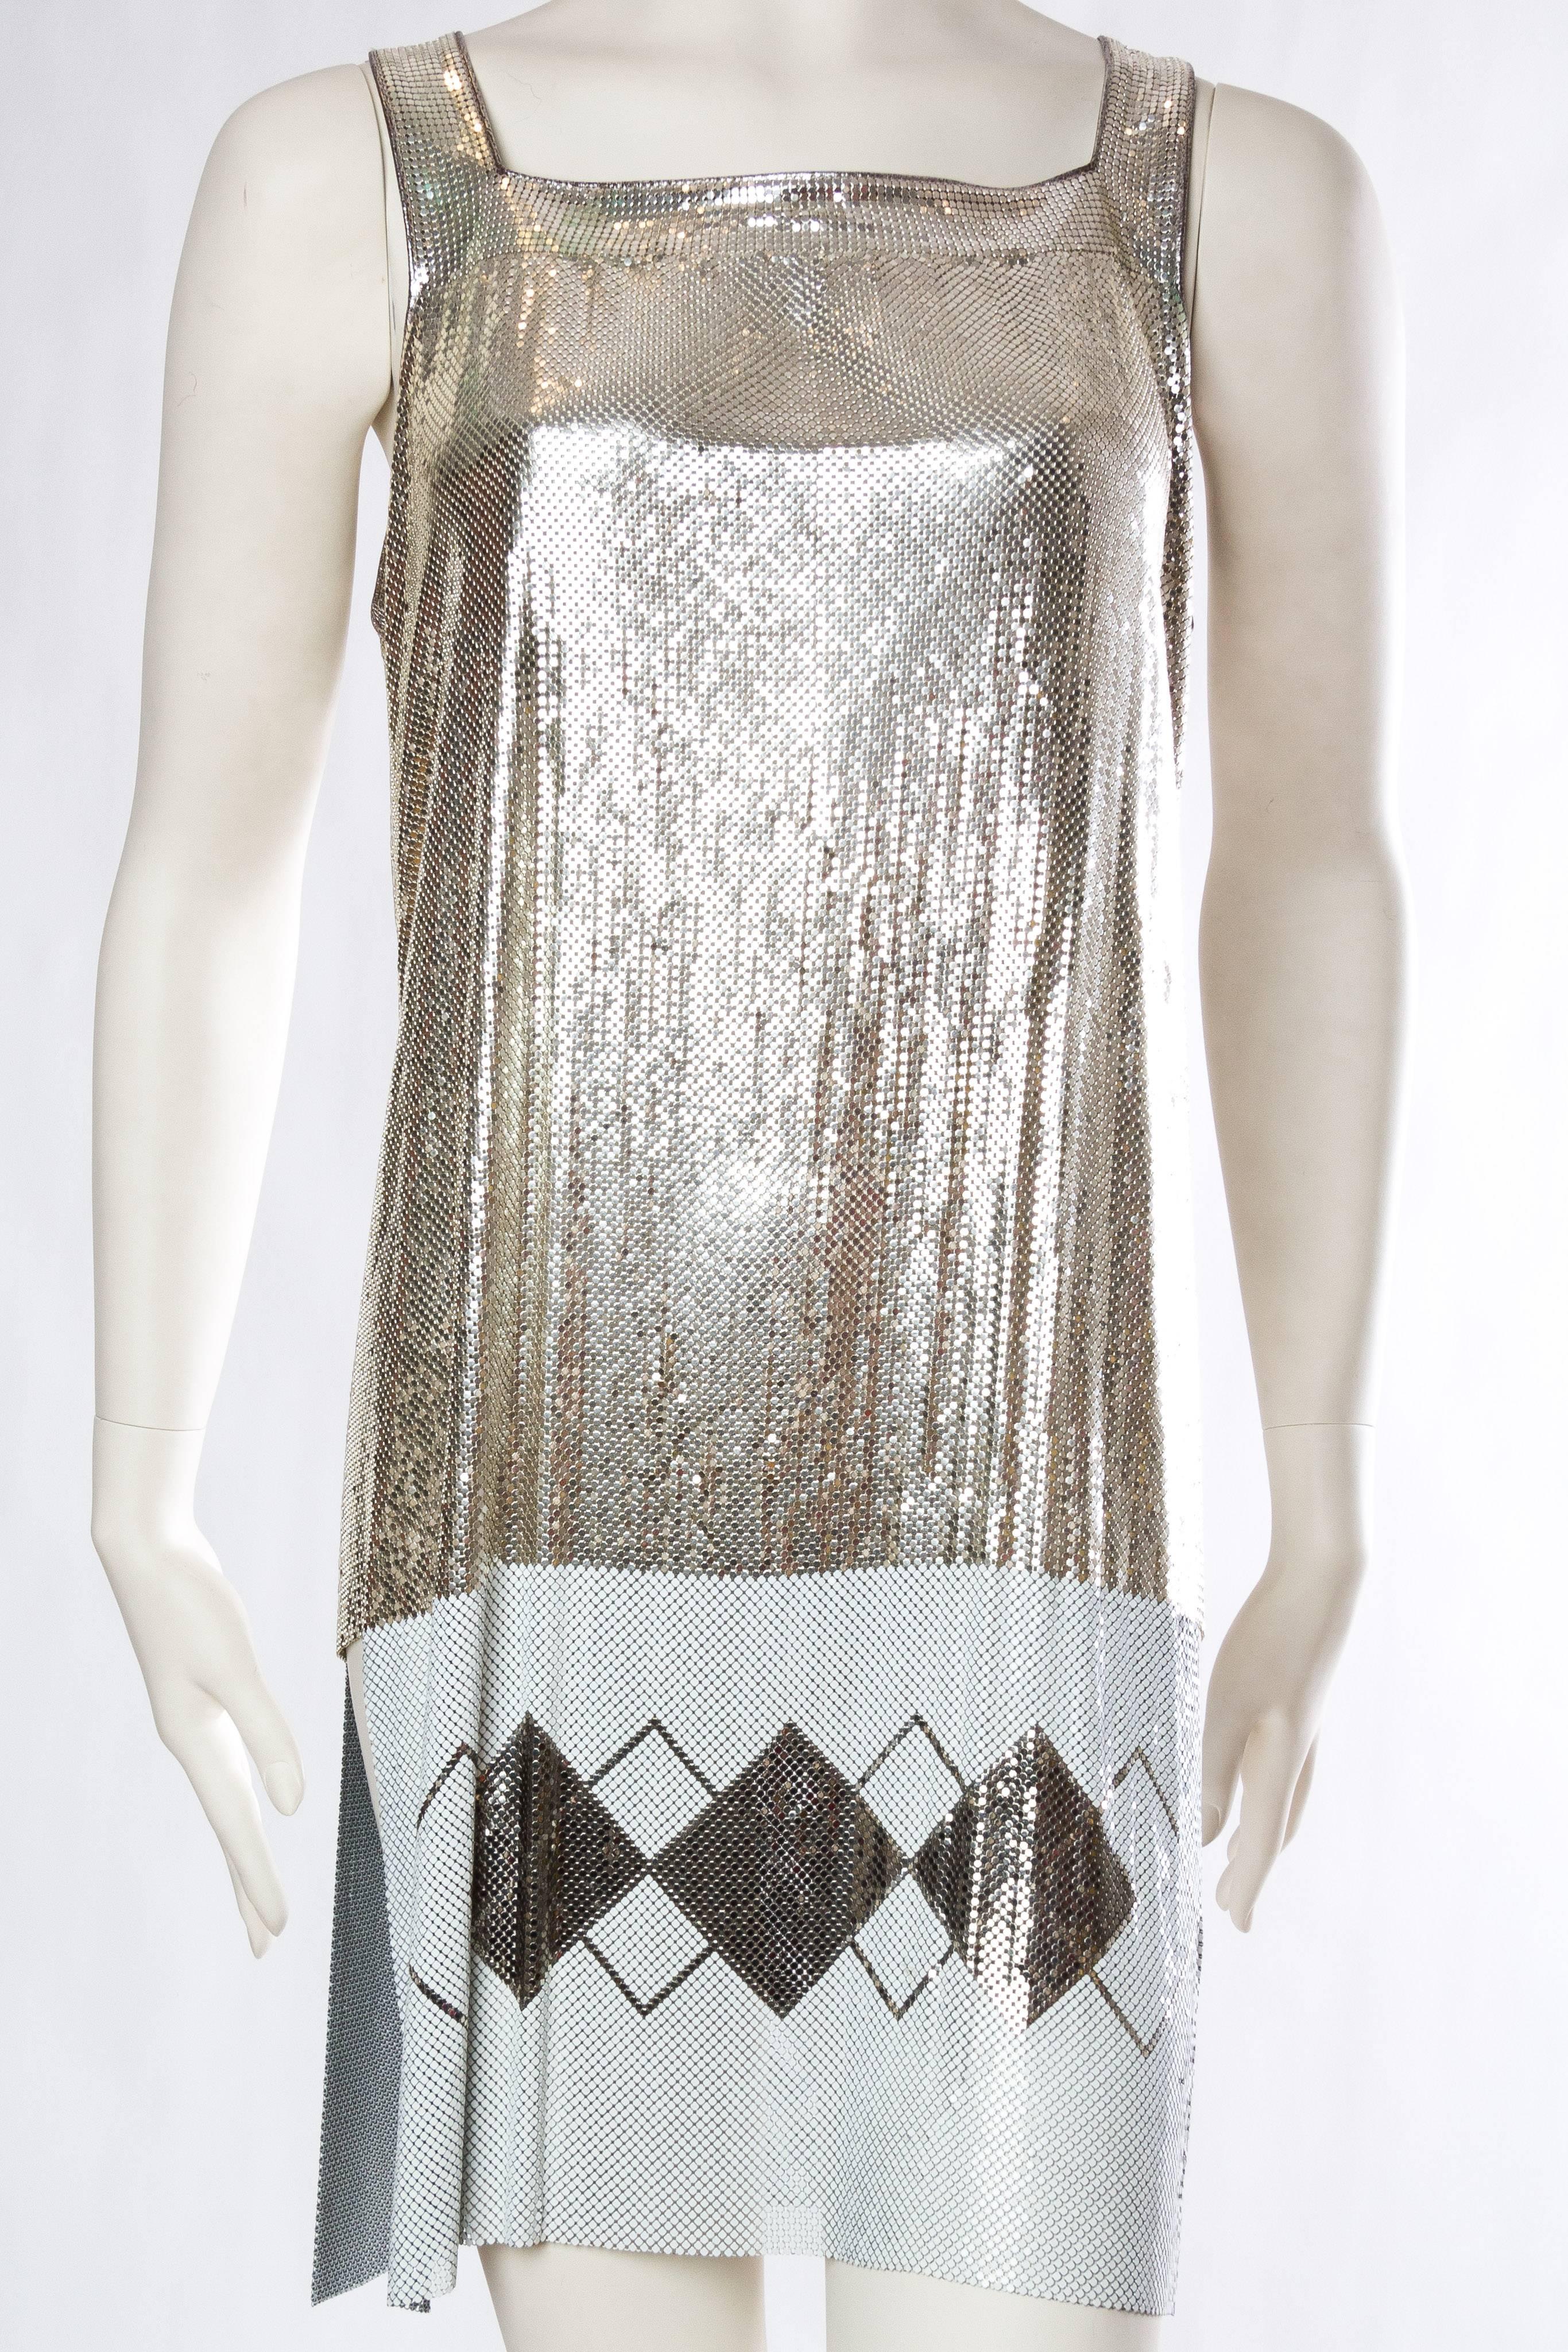 MORPHEW COLLECTION Silver & White Metal Mesh Deco Patterned  Cocktail Dress With Side Slits Made From Vintage Whiting Davis
MORPHEW COLLECTION is made entirely by hand in our NYC Ateliér of rare antique materials sourced from around the globe. Our